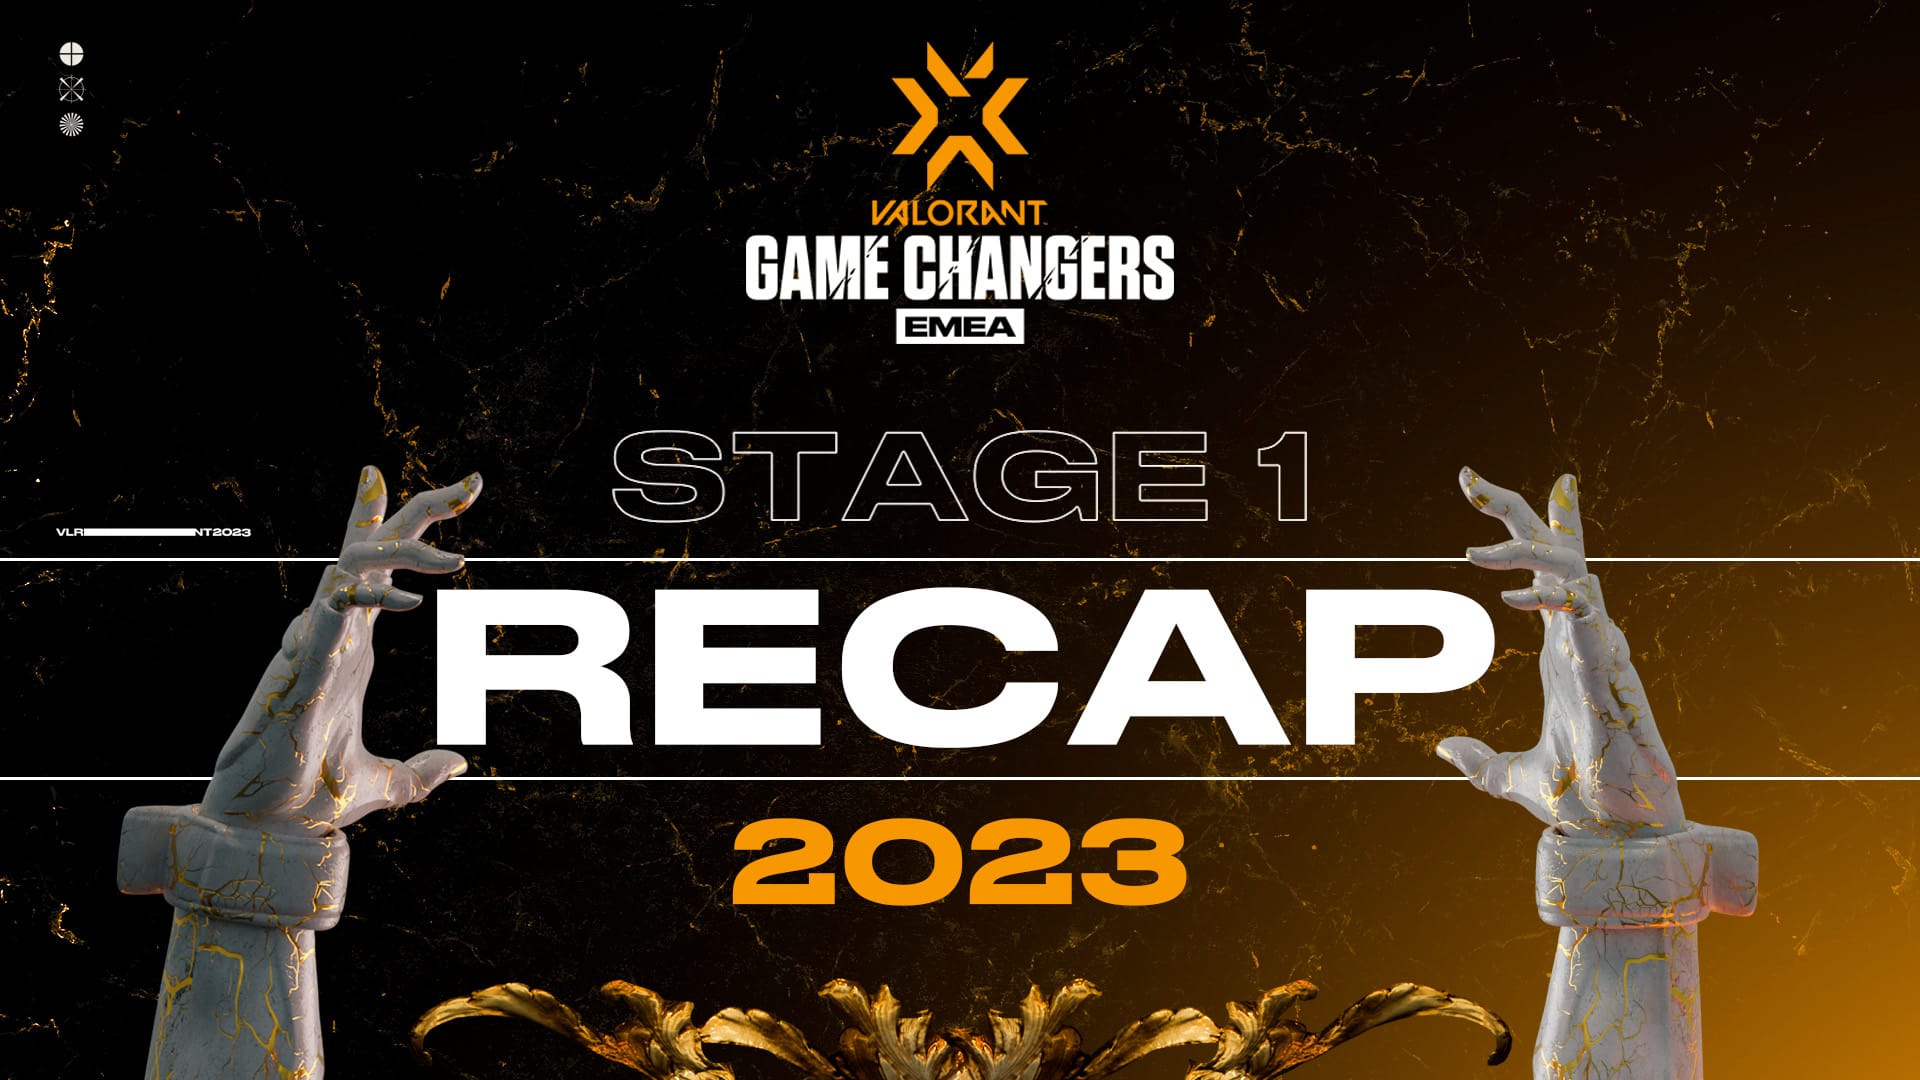 VCT Game Changers EMEA Stage 1 Recap Yet Another Trophy for G2 Gozen